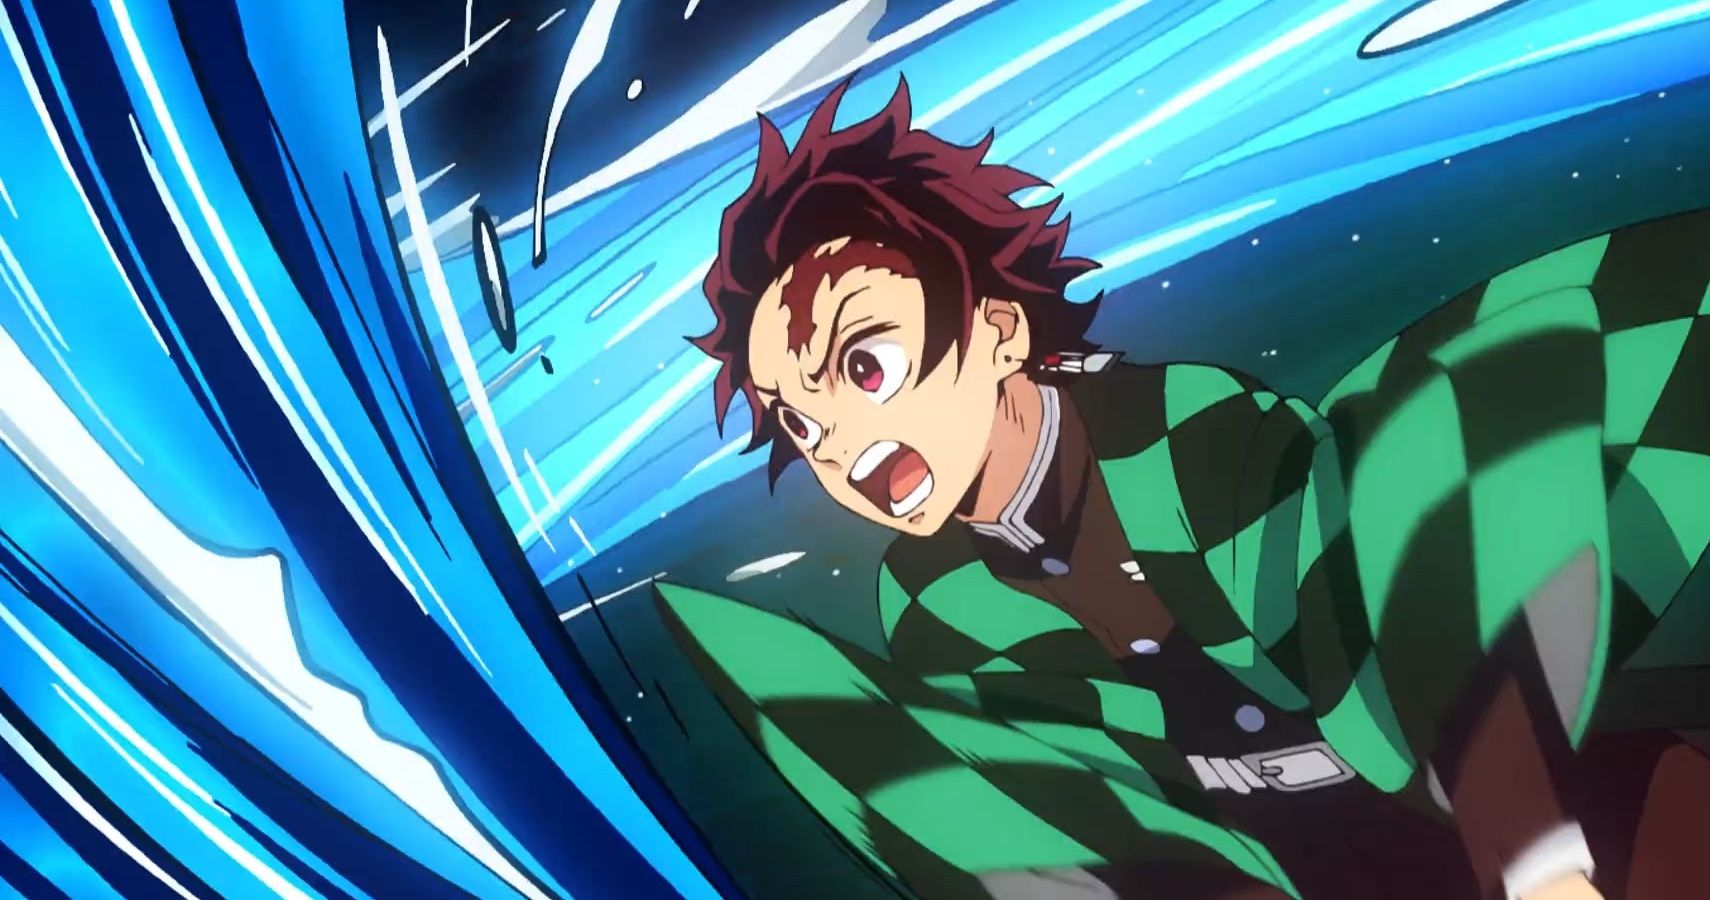 Demon Slayer: 10 Reasons Why It's A Must-Watch Anime Series | CBR